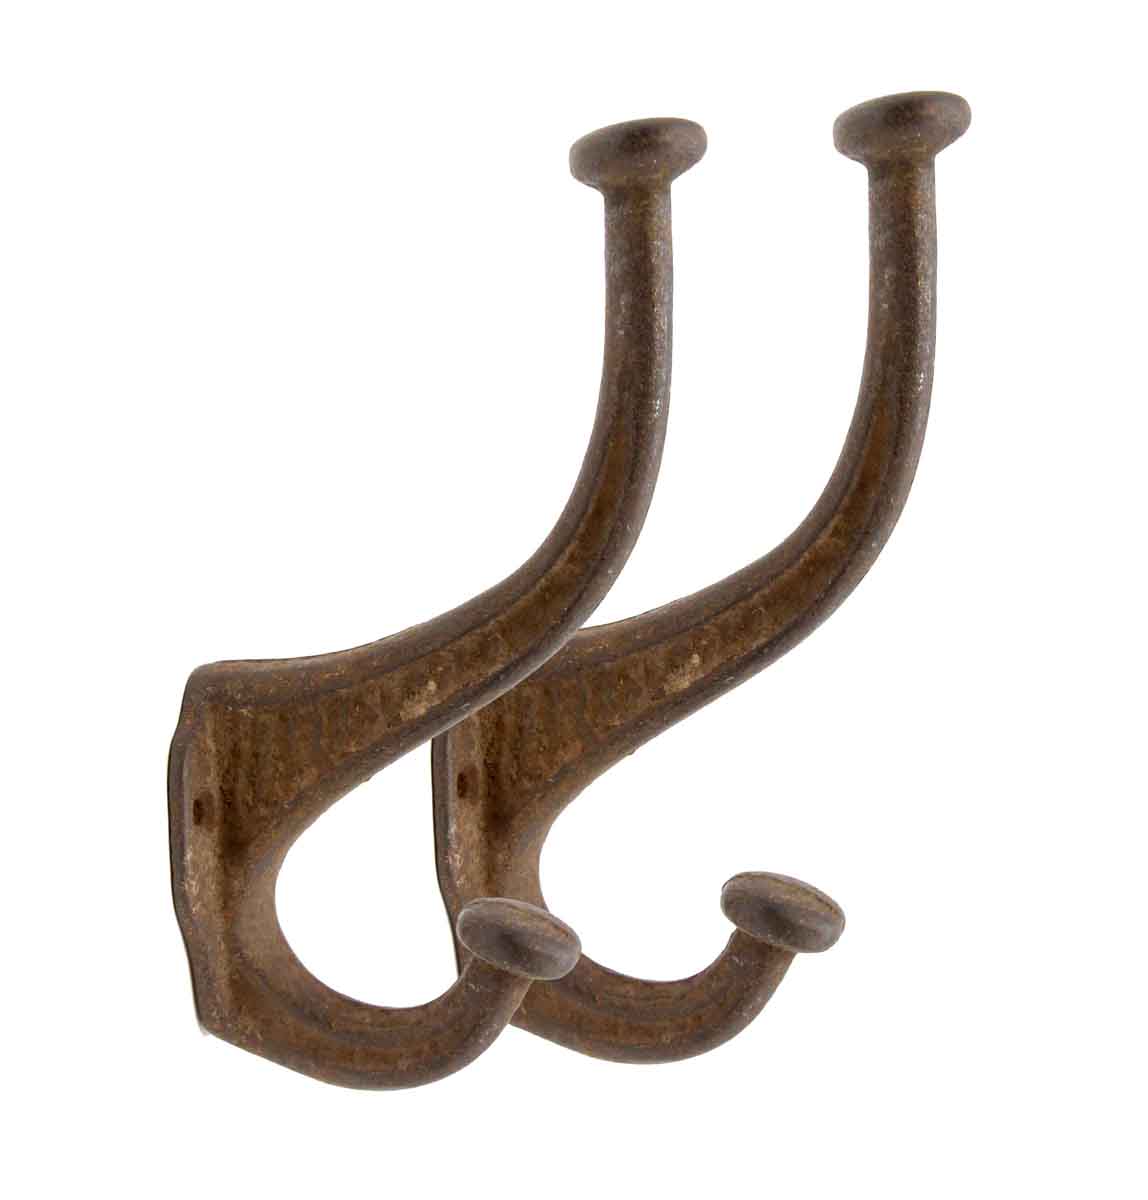 Pair of Ornate Cast Iron Double Arm Wall Hooks